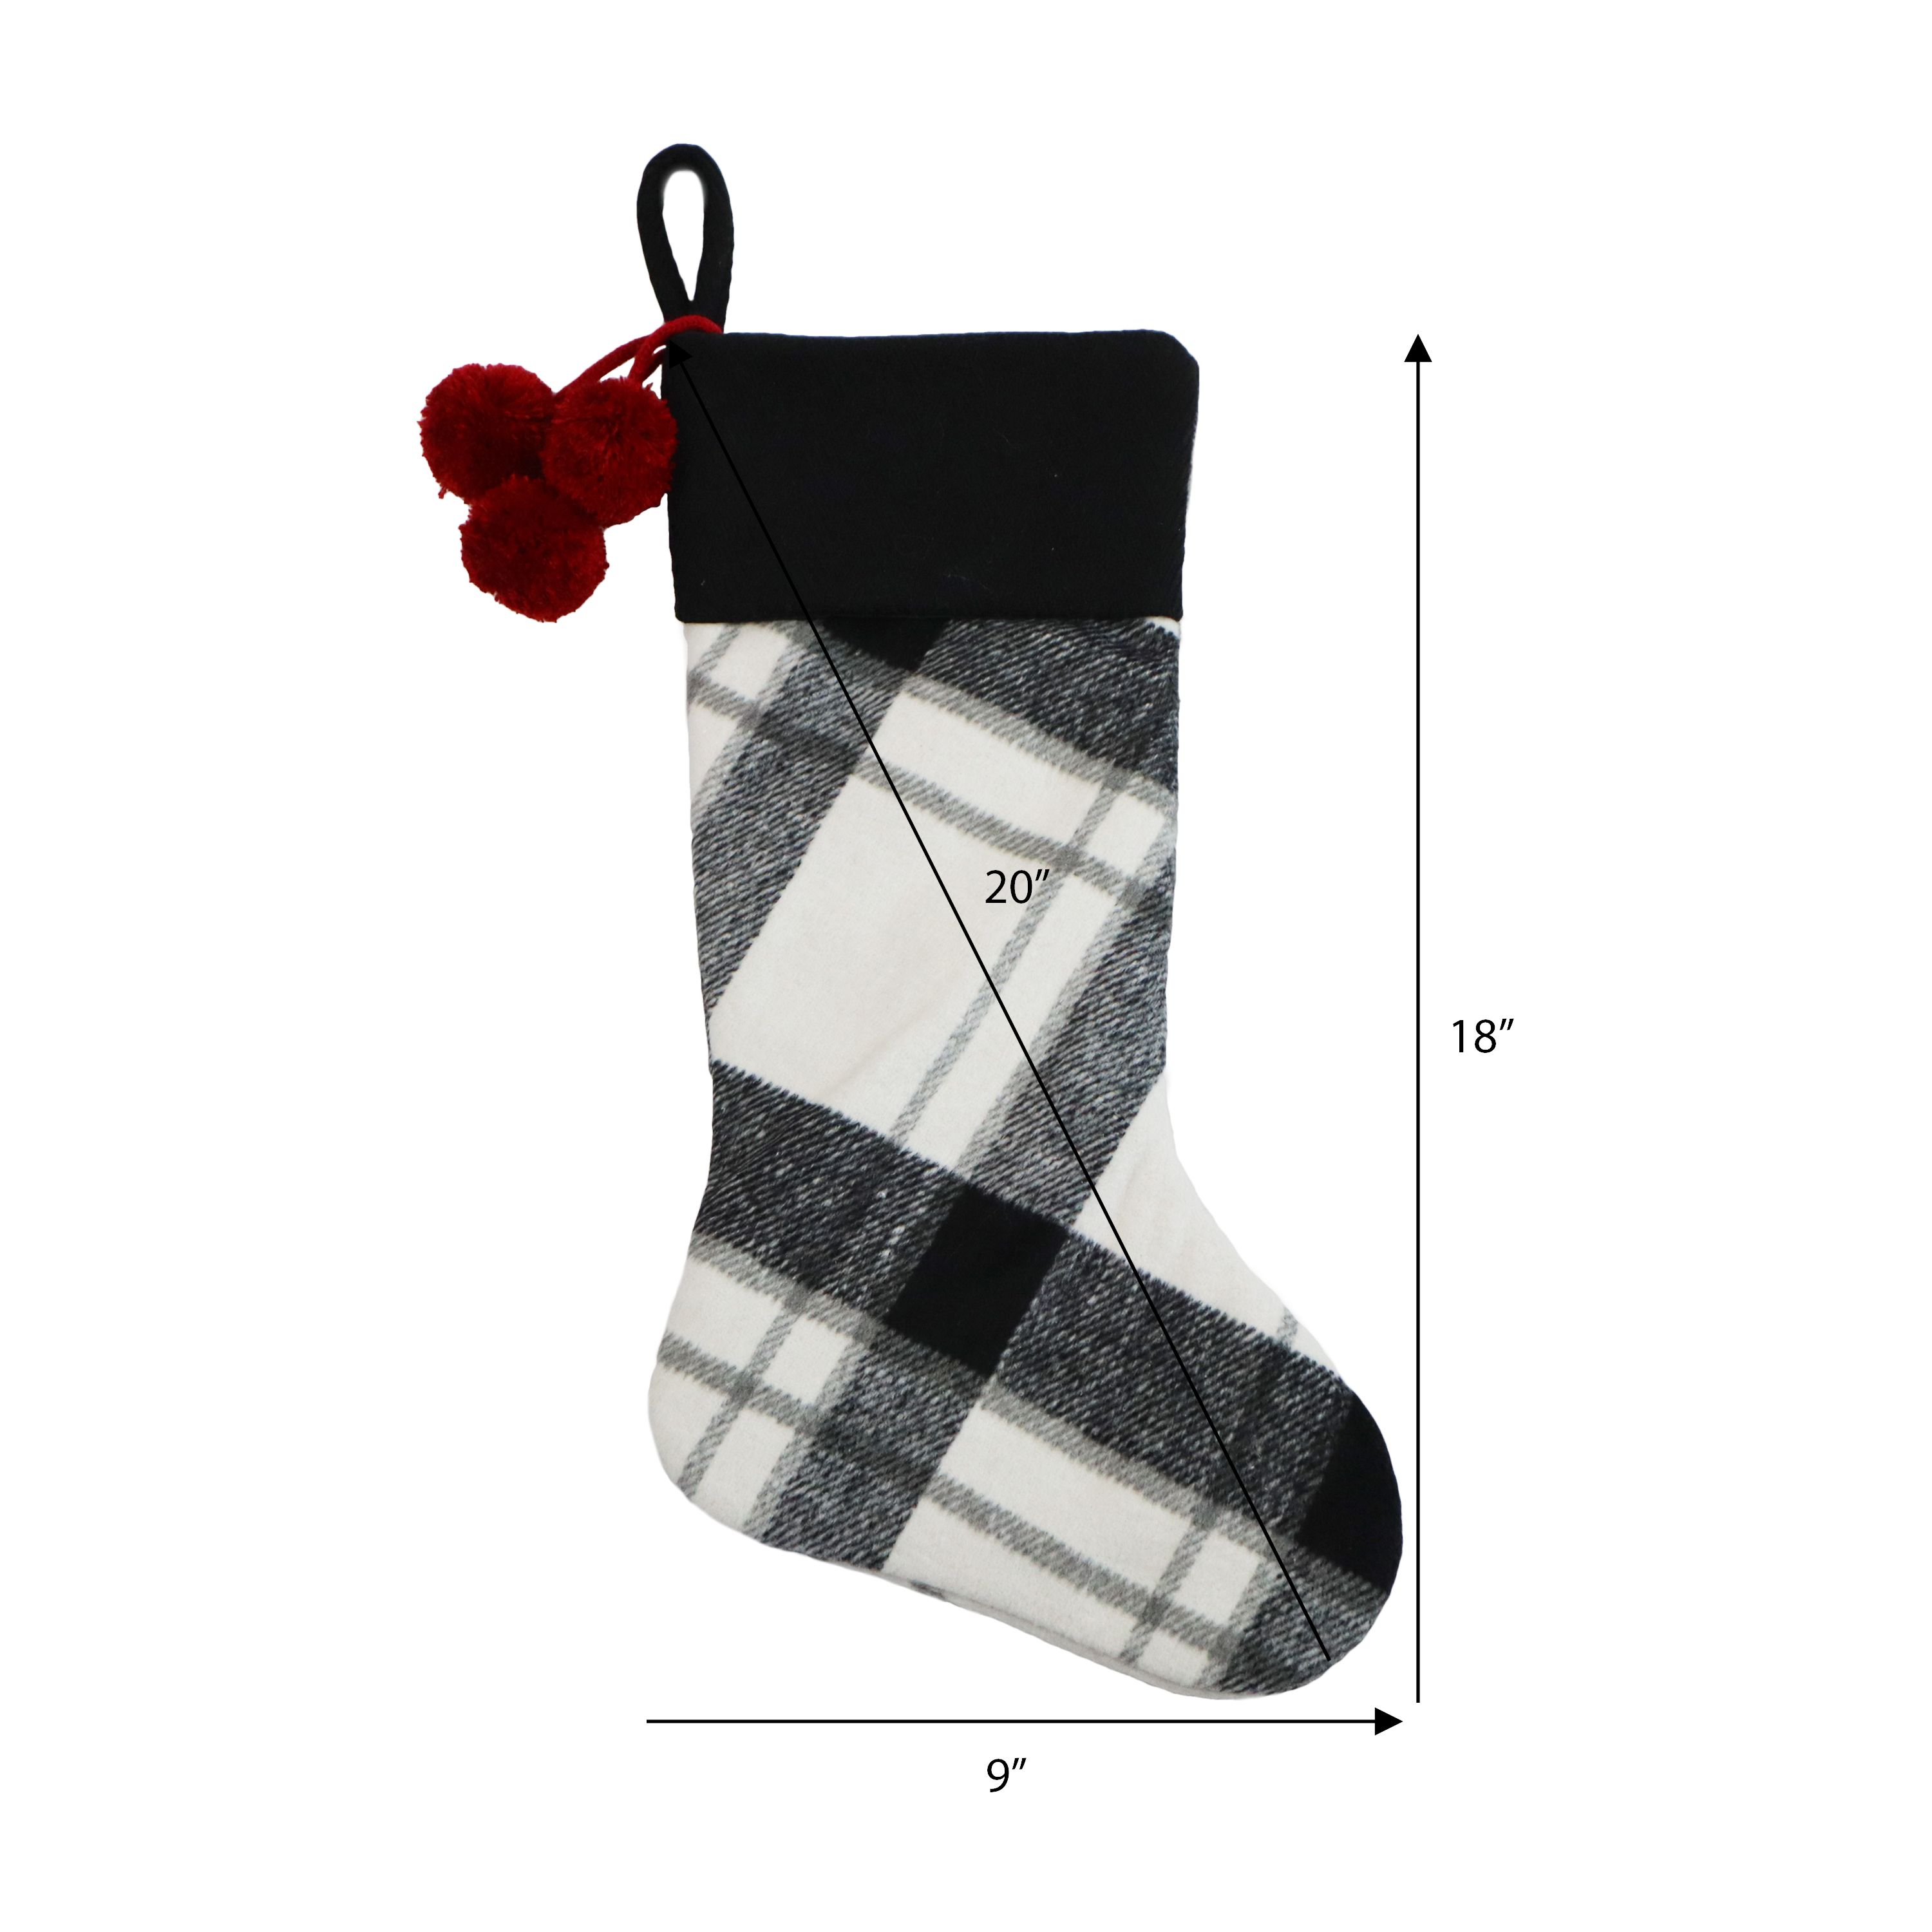 Holiday Time Black and White Plaid Stockings, 20", 2 Pack - image 3 of 3